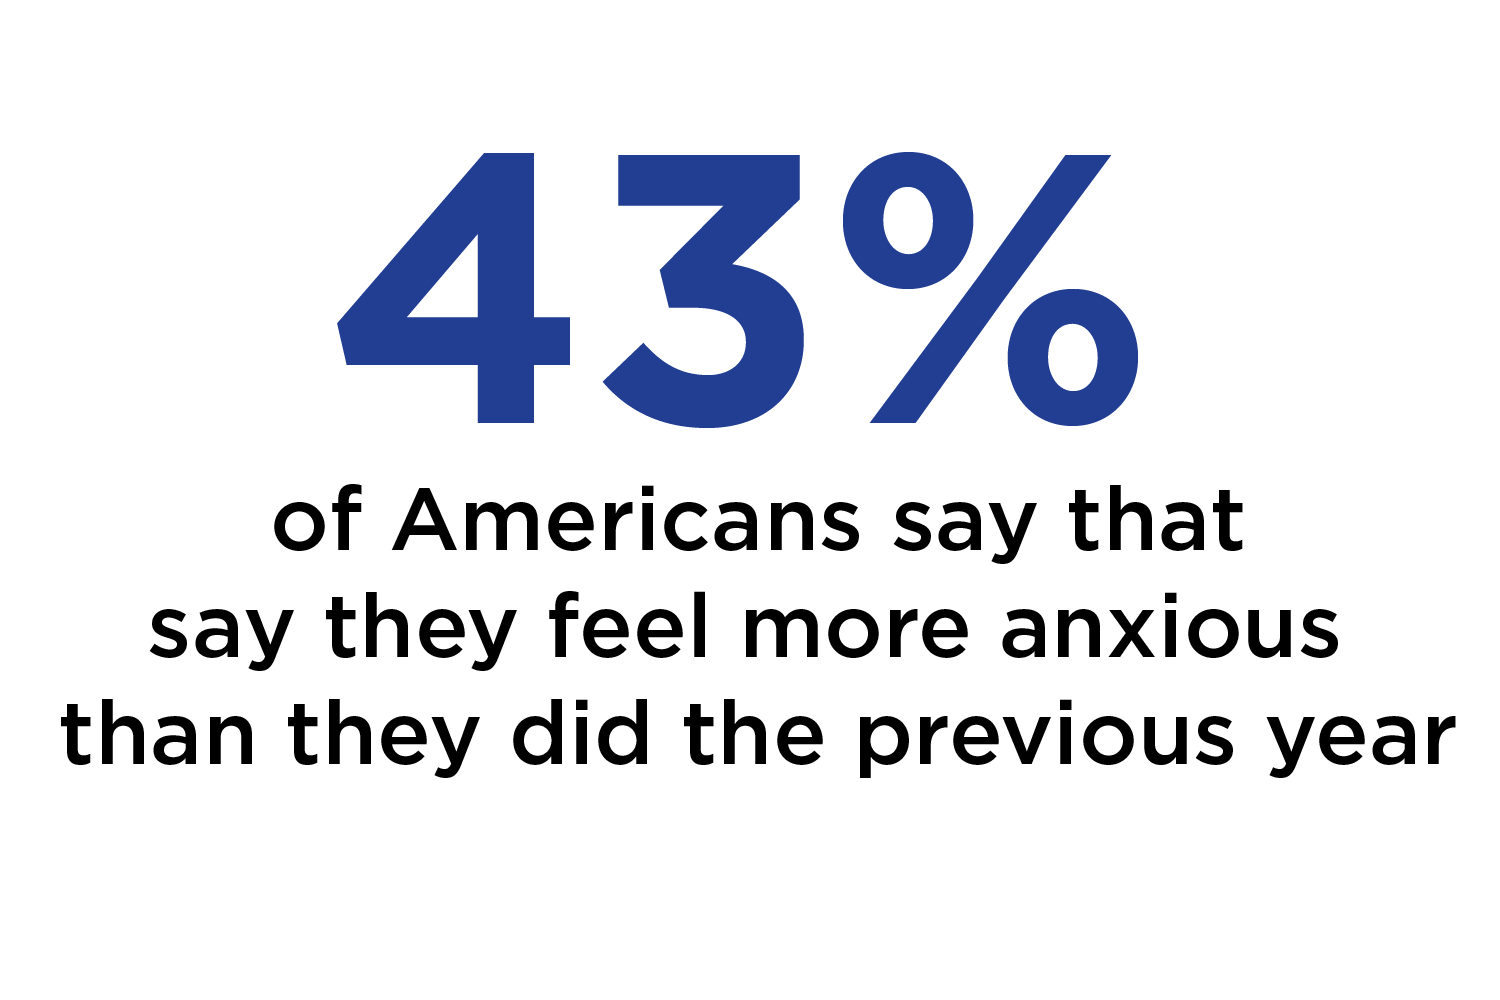 43% of americans say they feel more anxious than they did the previous year